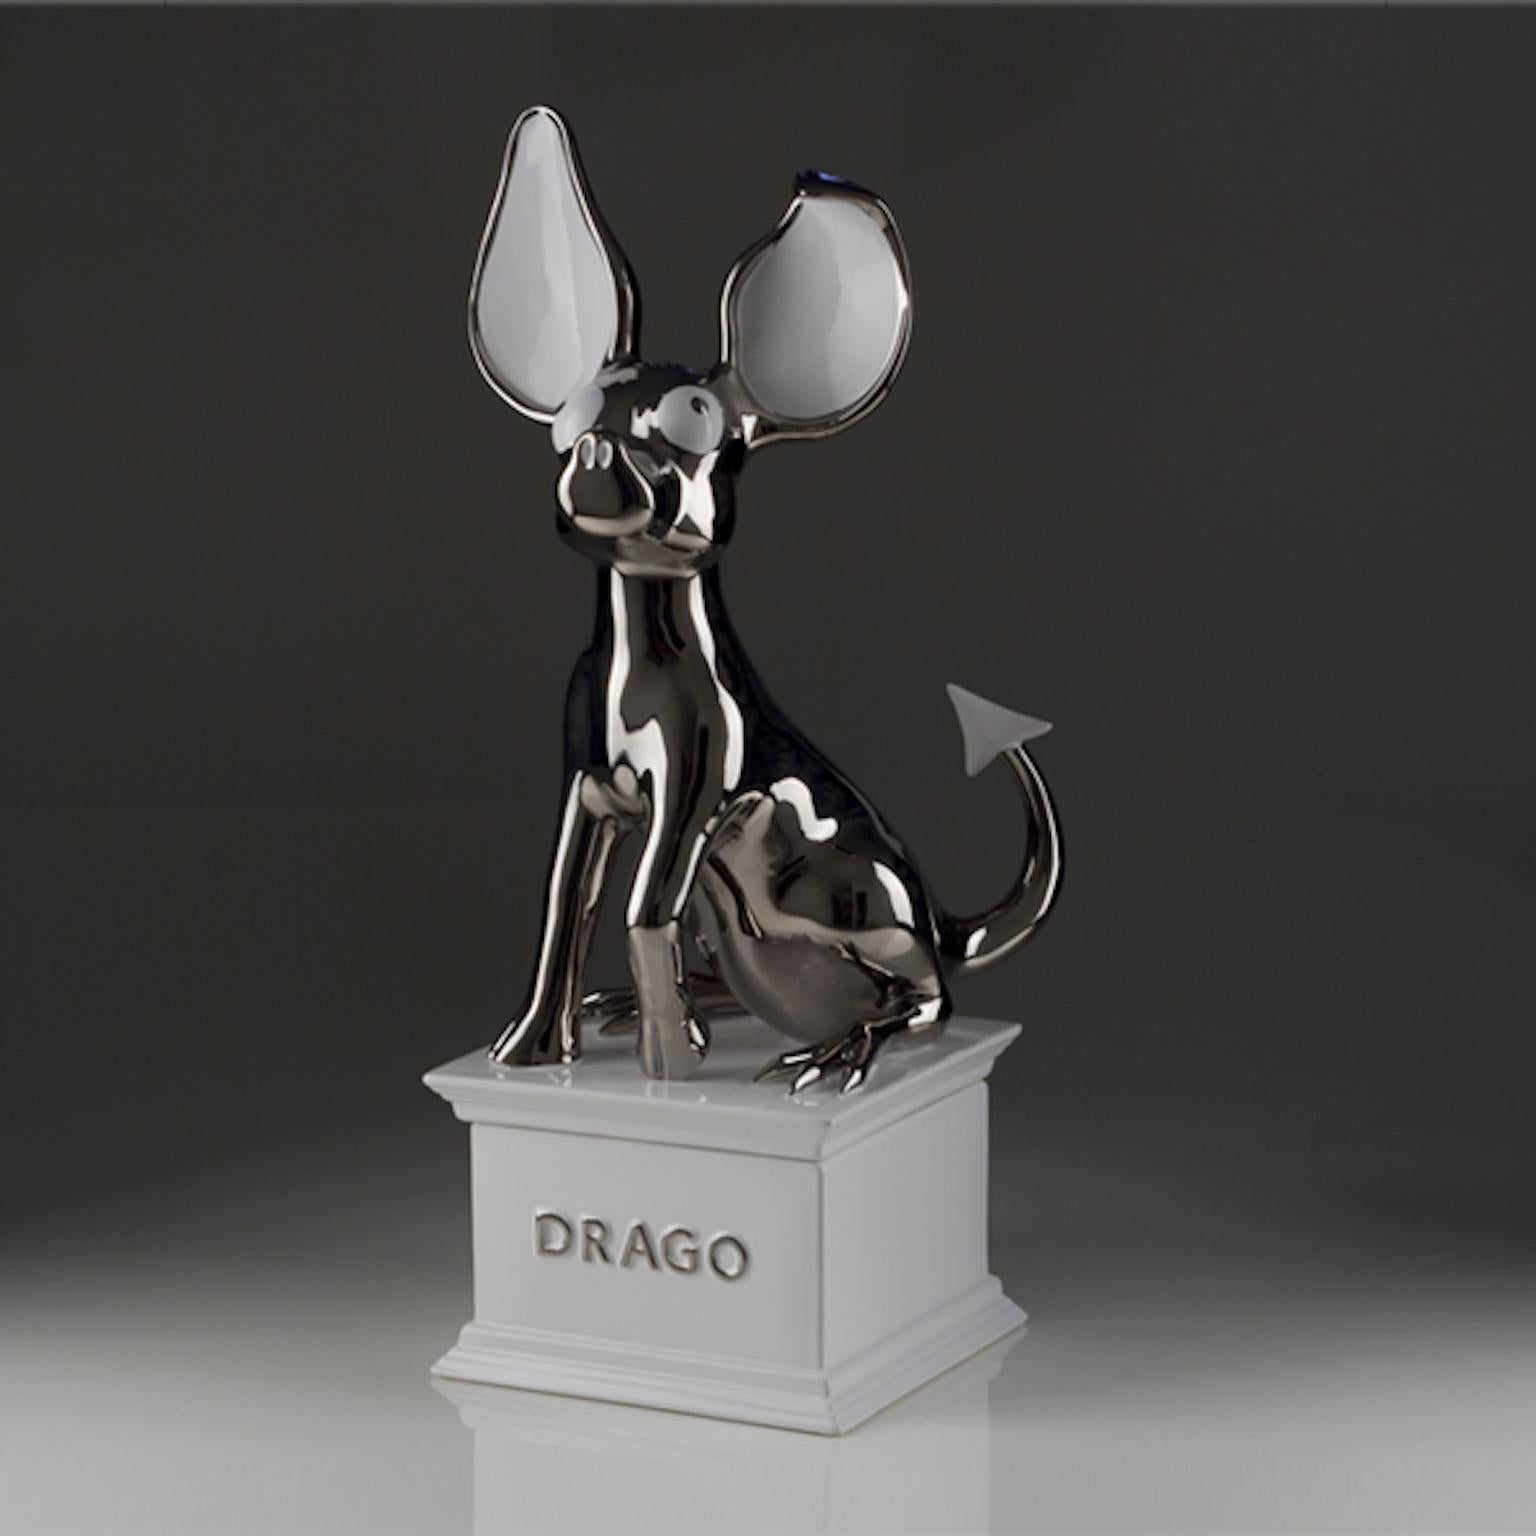 Ceramic sculpture designed by Matteo Cibic and produced by Superego Editions, 99 pieces limited edition. Signed and numbered.

Biography
Matteo Cibic was born in Parma, Italy, on October 5, 1983. He collaborates with Studio Camuffo and works as a